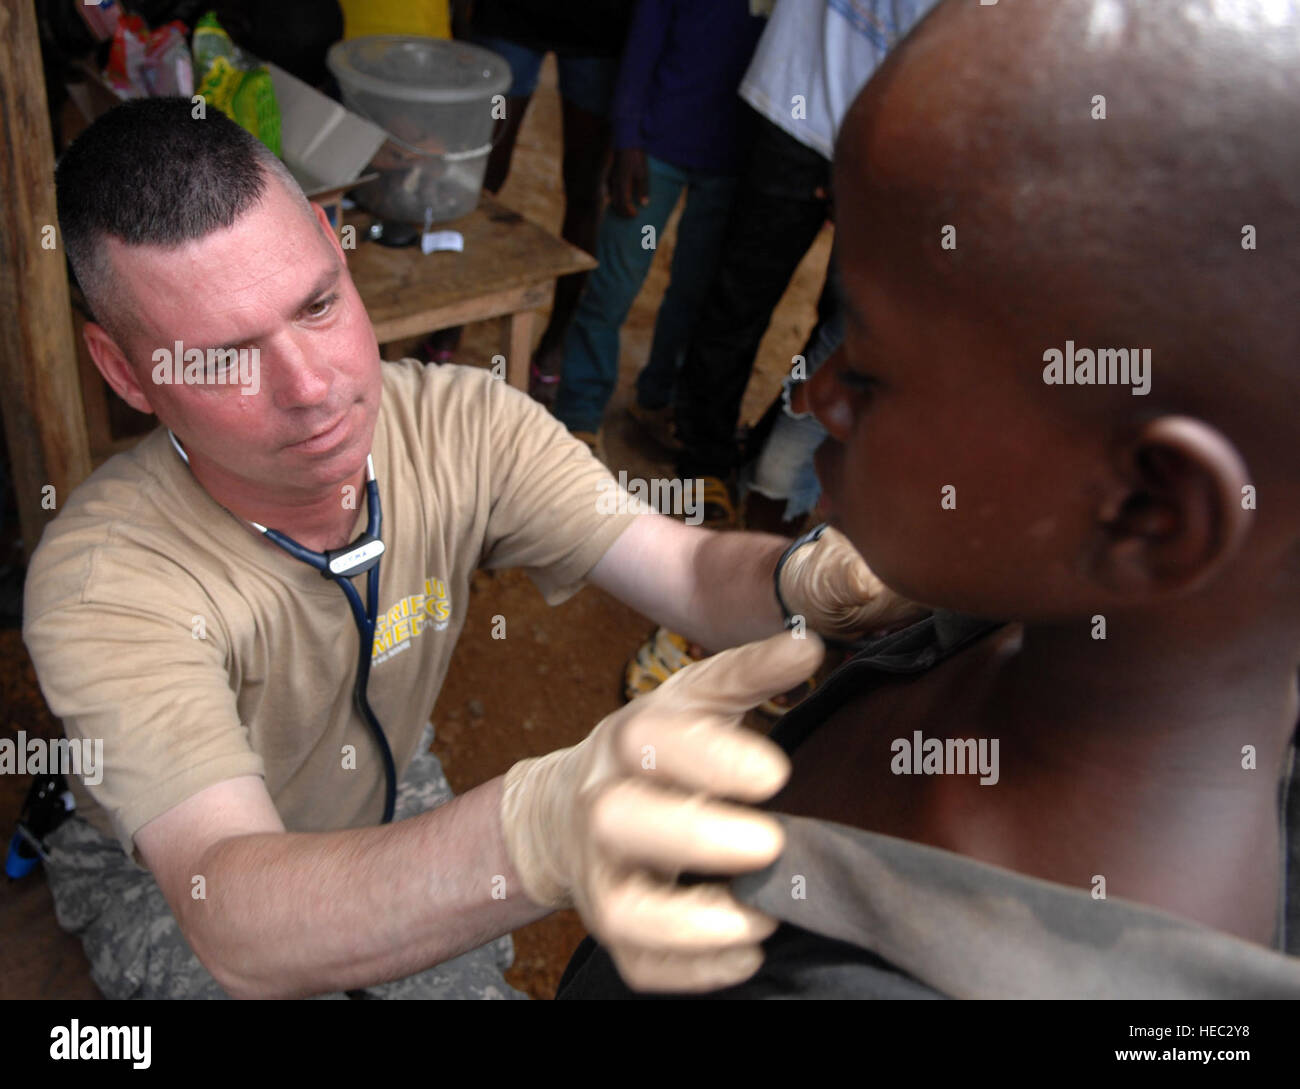 U.S. Army Sgt. 1st Class Robert Gutman, a field medic deployed with Operation ONWARD LIBERTY from Ypsilanti, Mich., performs a physical examination on a child during a medical outreach visit to Gondor Town, Liberia, July 2, 2013. The AFL led a 14-person medical outreach team including doctors, nurses and a support staff to three villages deep in the jungles of Grand Cape Mount County, Liberia, from July 1 to July 4, 2013. The medical outreach mission was a first for the AFL which was restructured in 2005 following 15 years of civil war. OOL advisors have been mentoring the AFL since 2010.  OOL Stock Photo